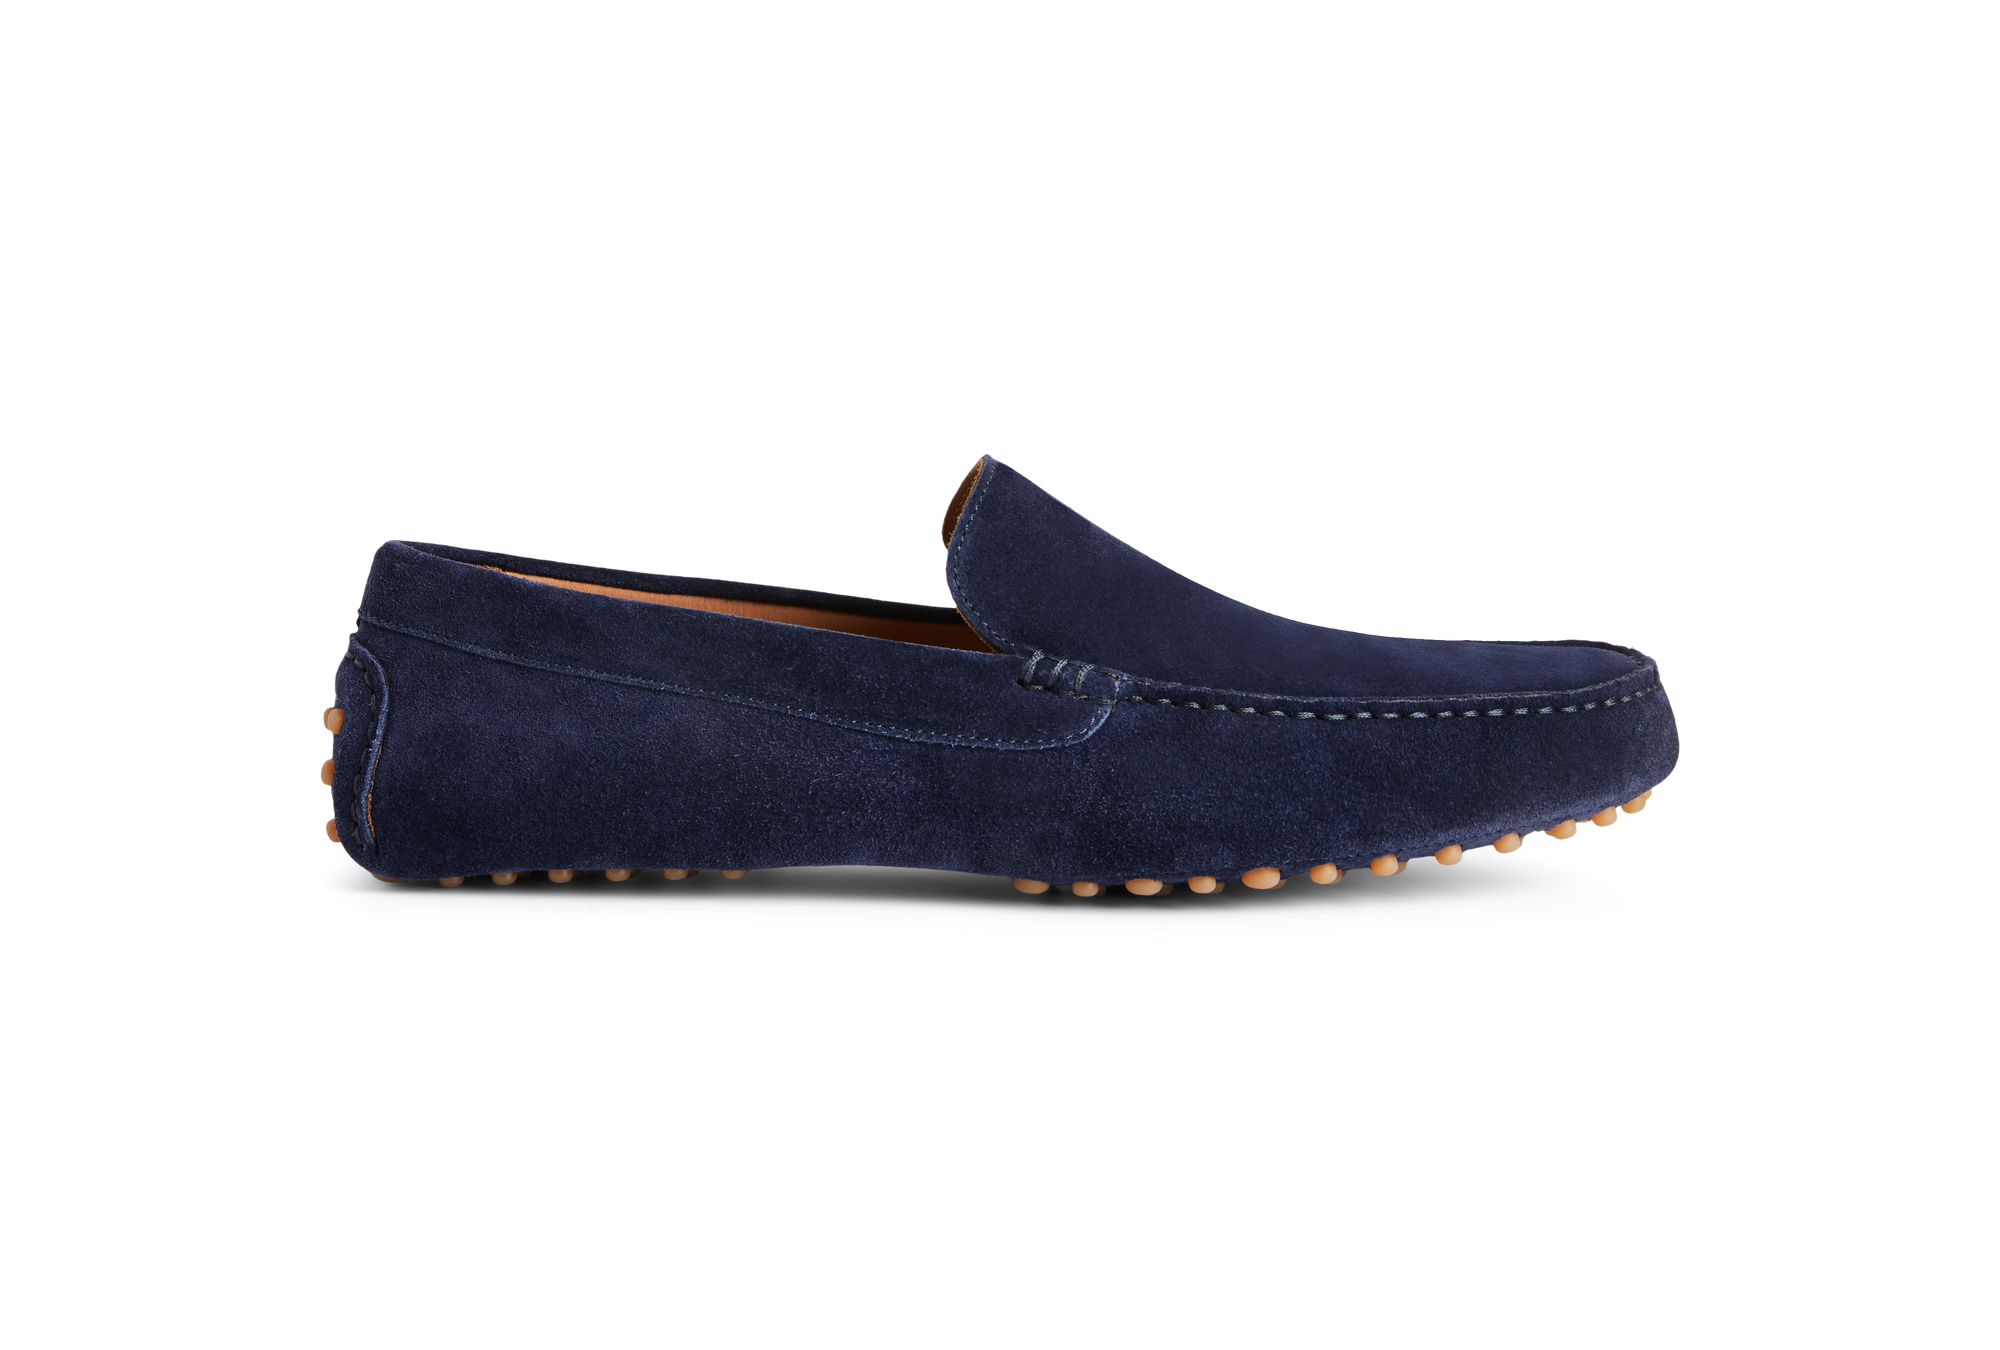 The Corso - Suede Driver - Navy - M.Gemi